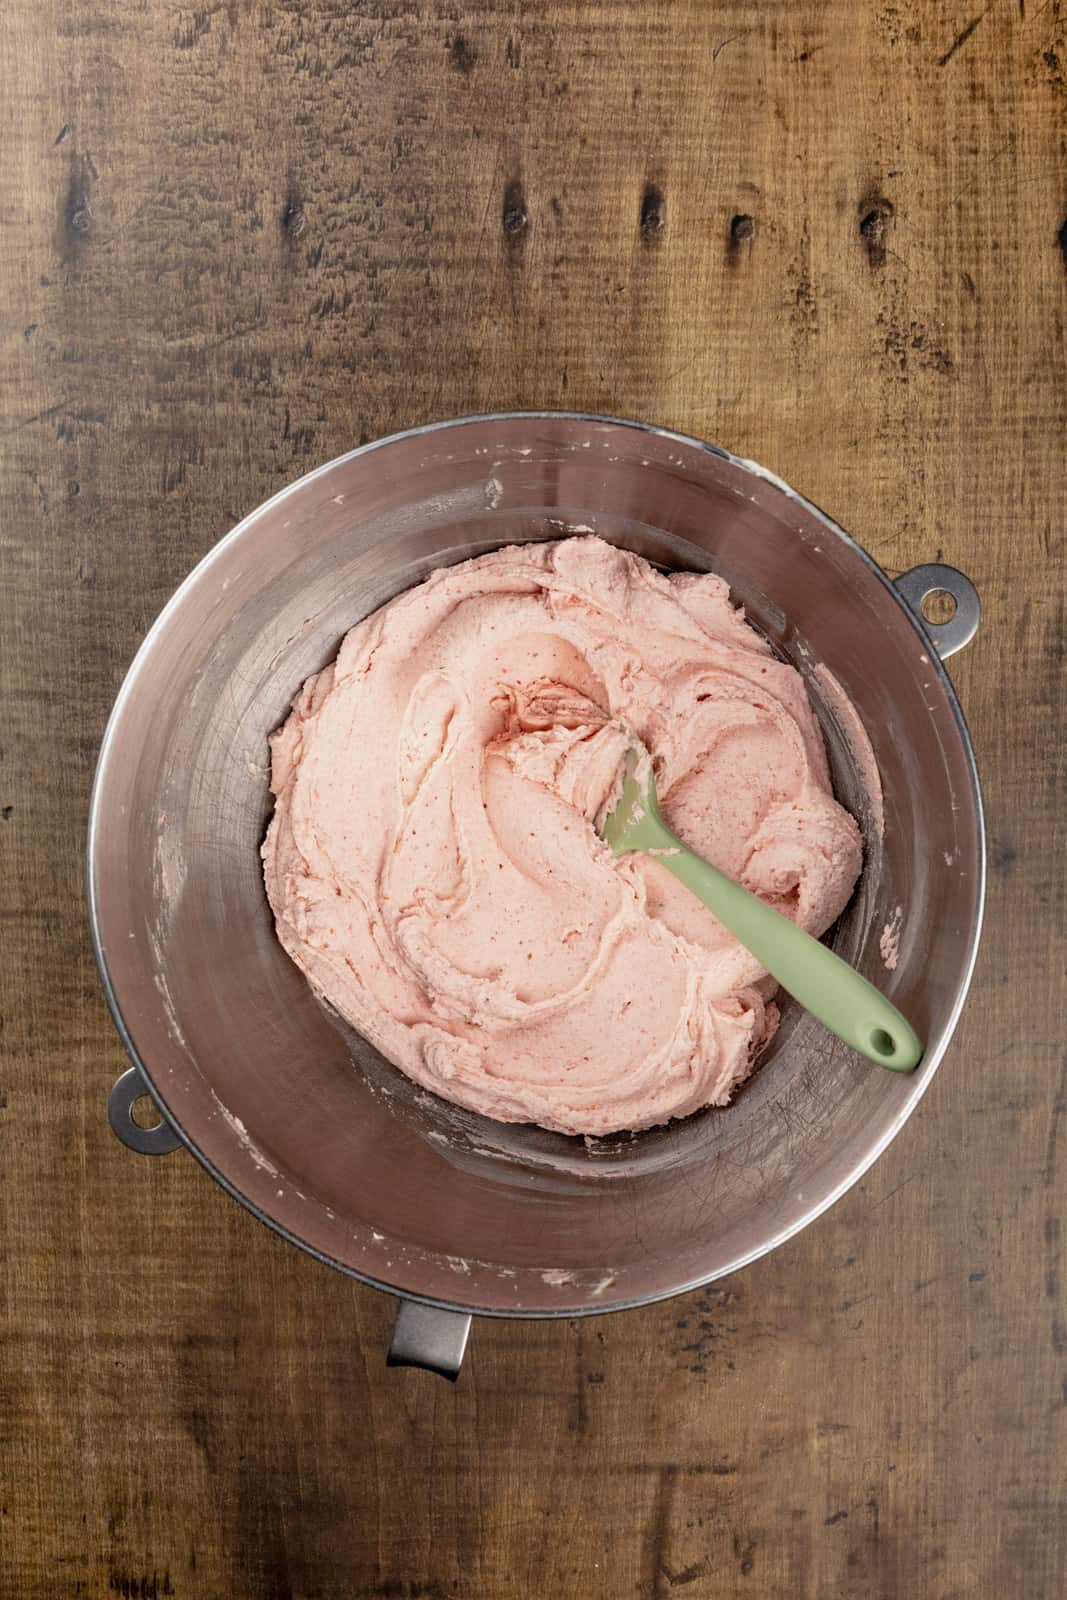 A silver mixing bowl is on a wood tabletop filled with finished buttercream frosting. A green spatula is in the frosting.